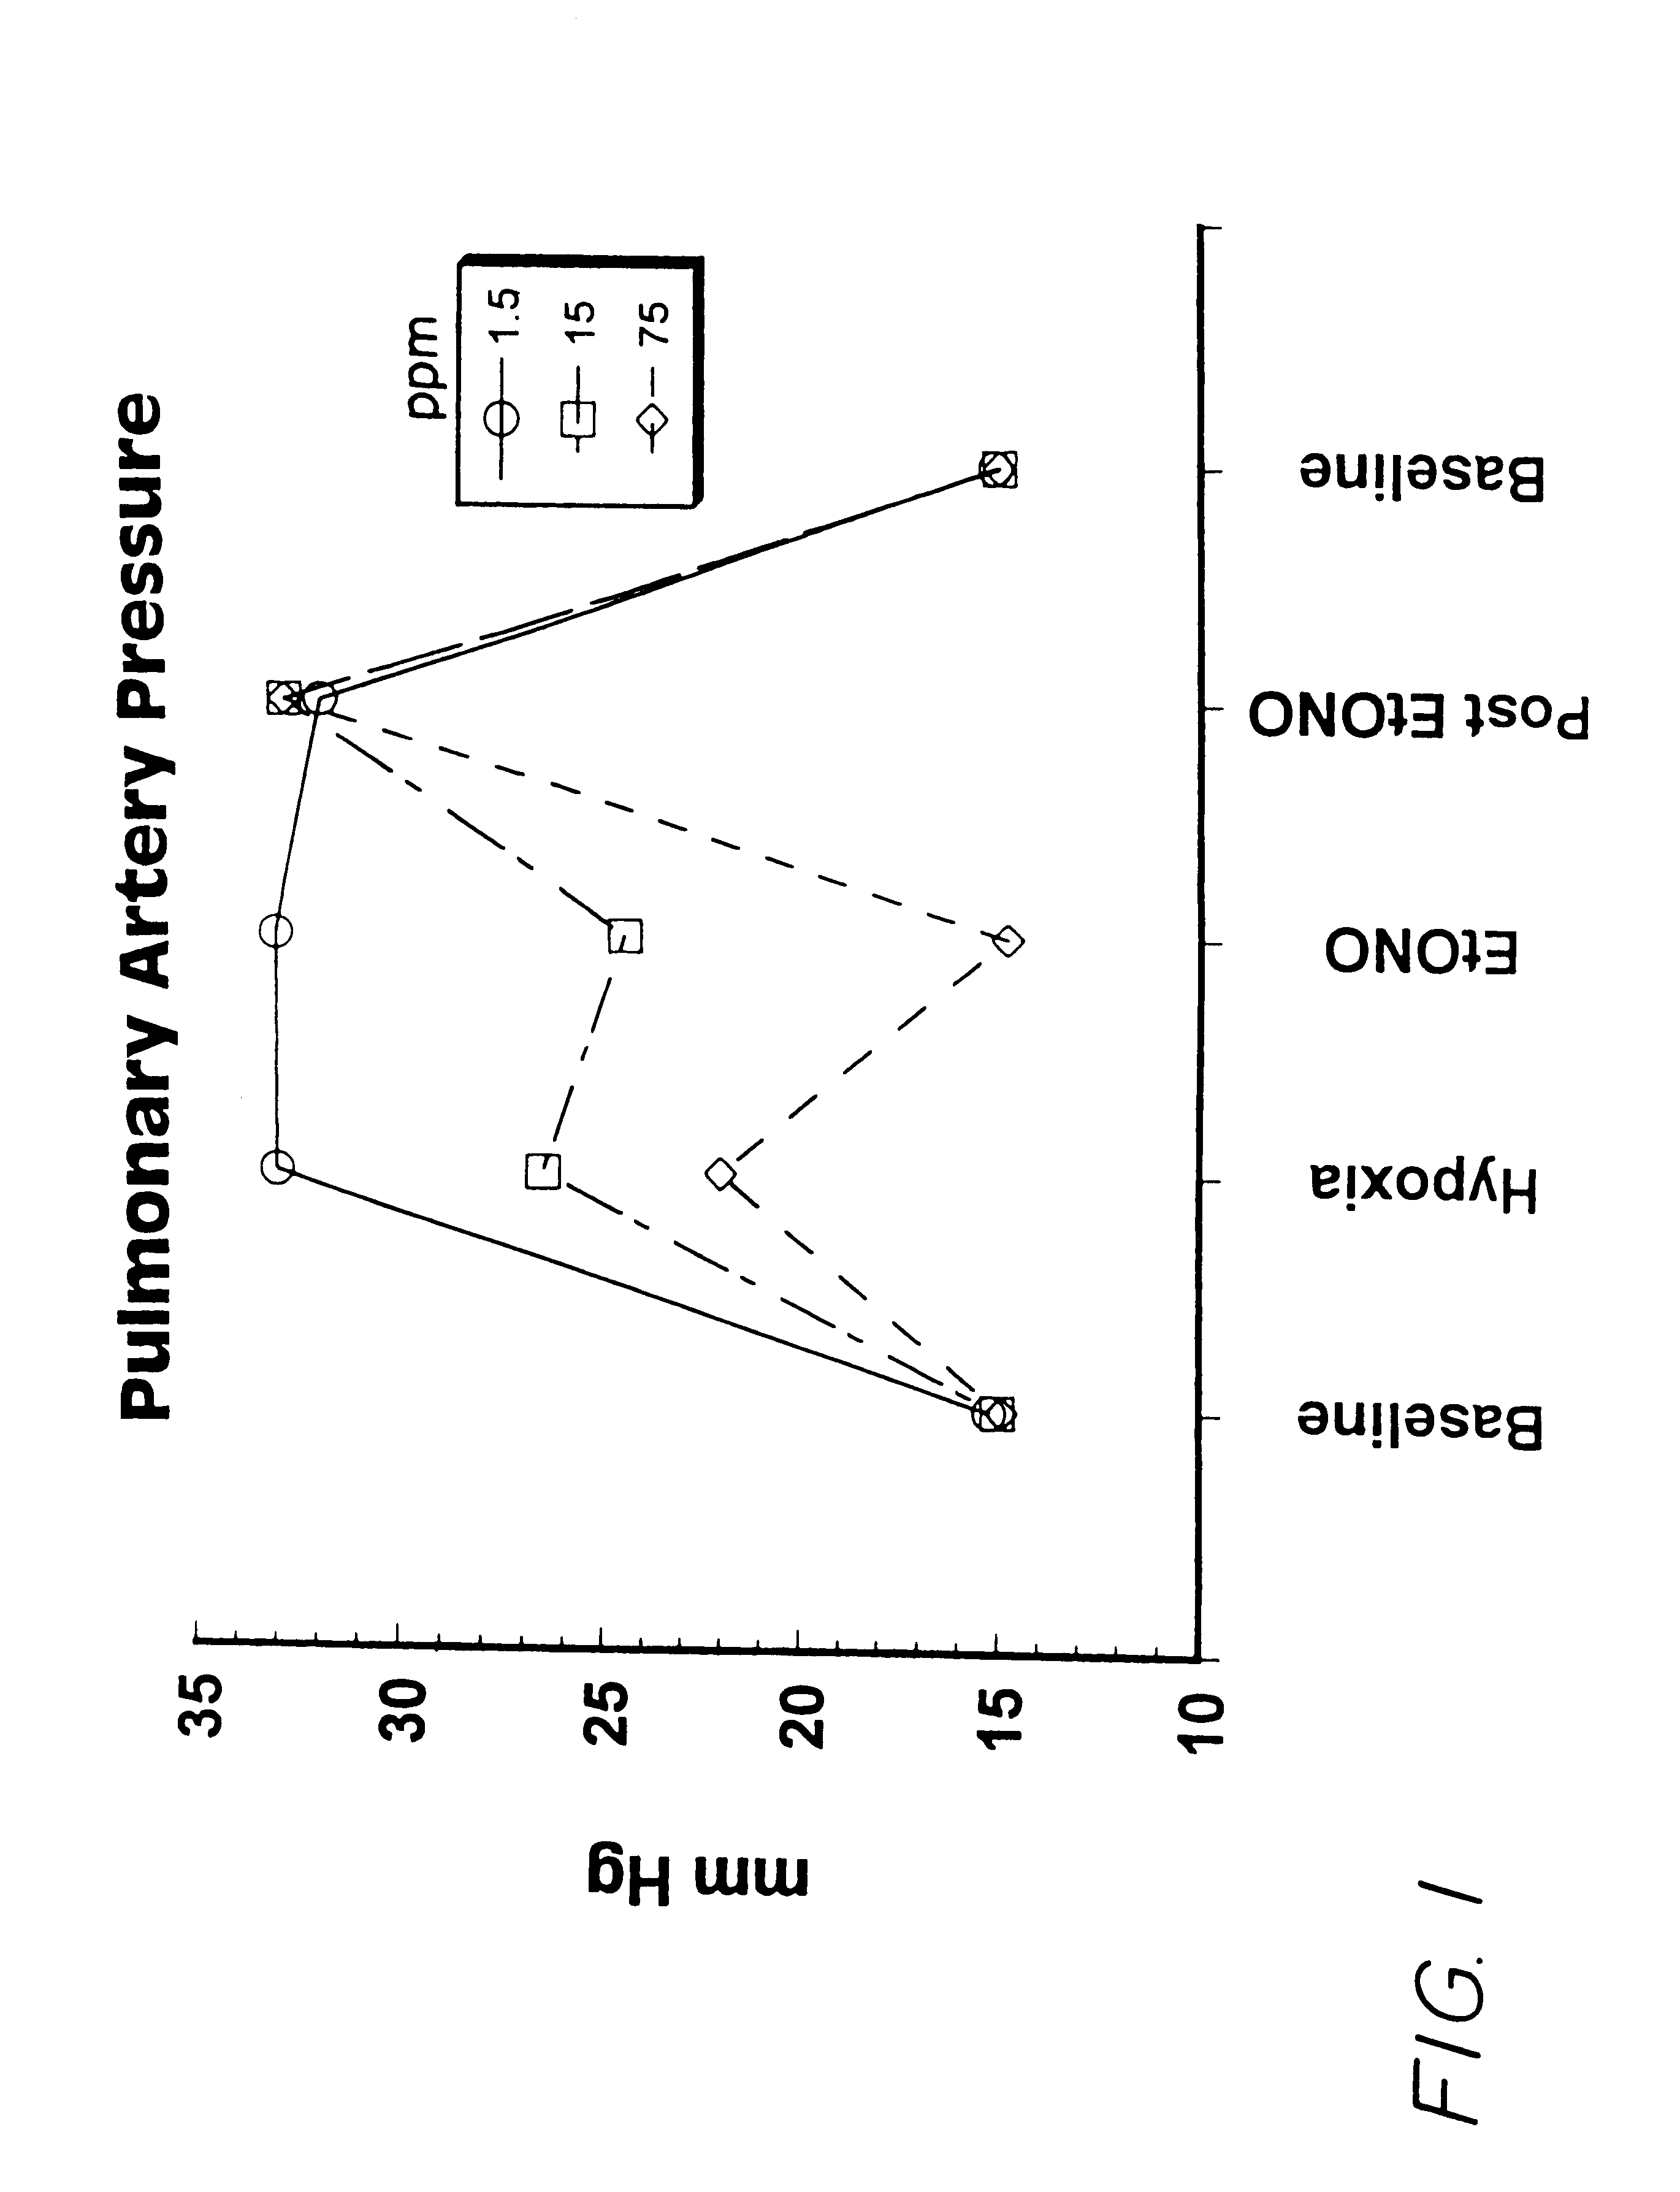 Method of treating cardio pulmonary diseases with no group compounds